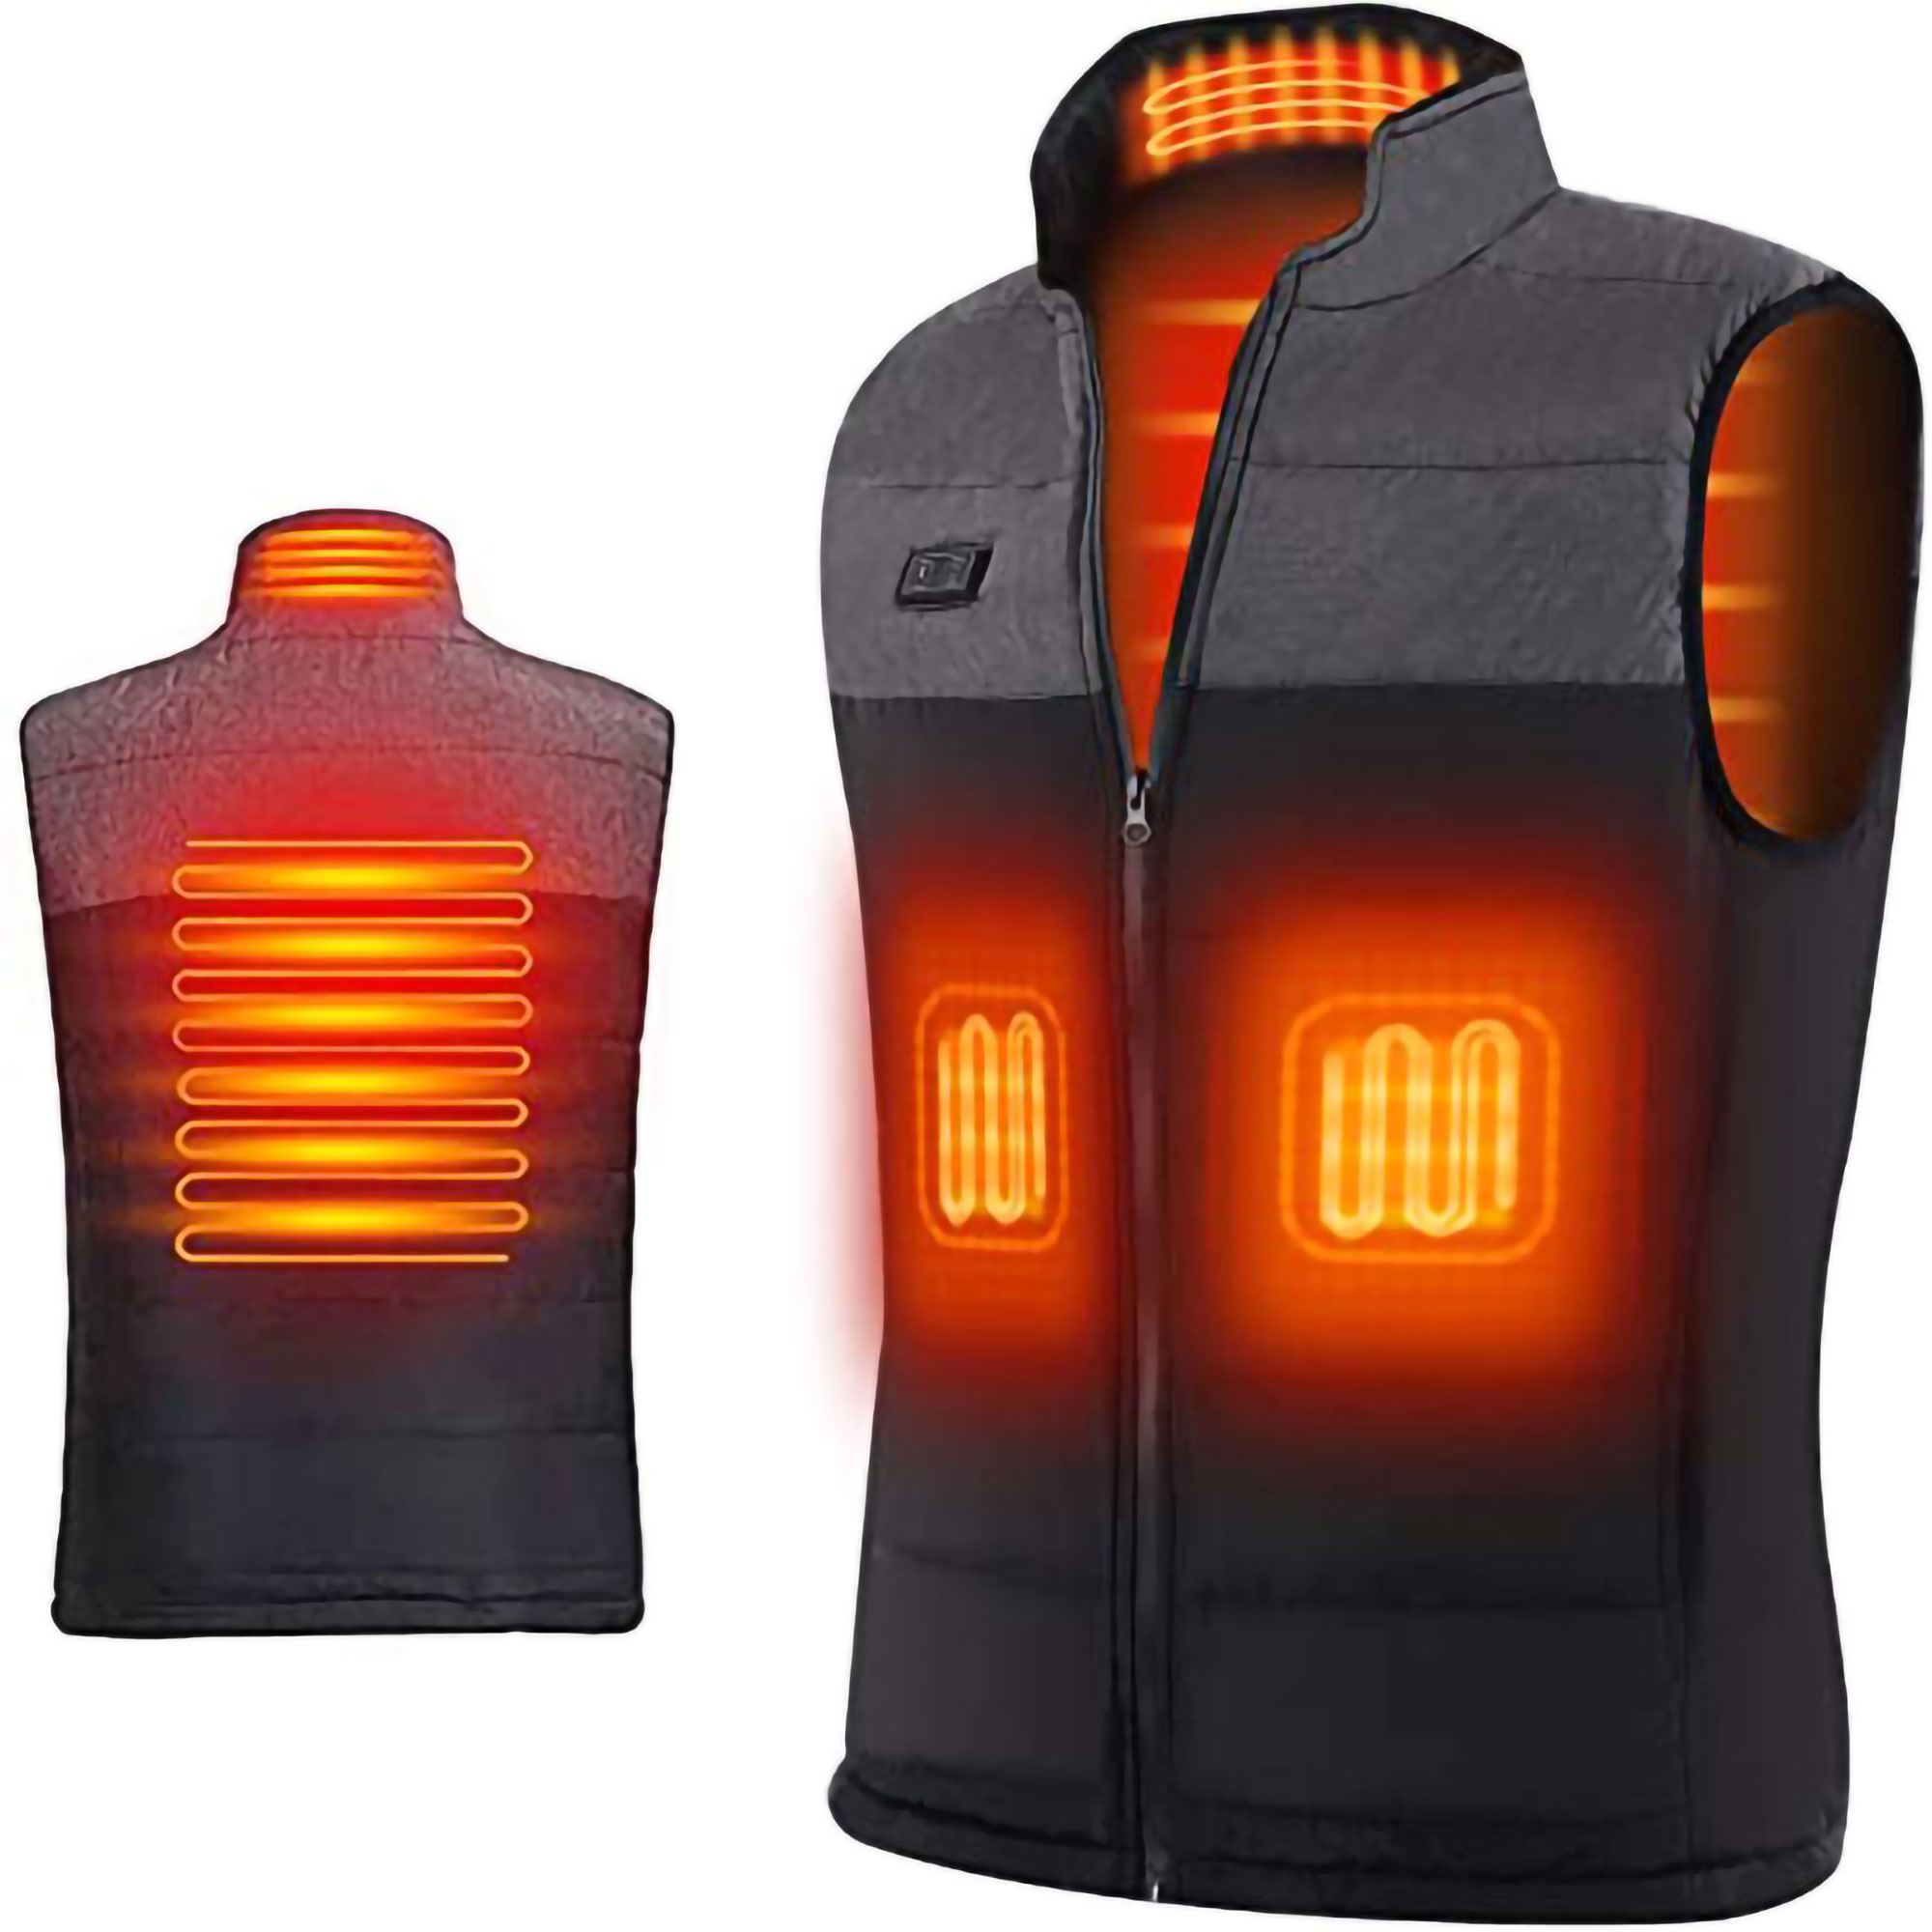 Sexy Dance Electric Thermal Heated Vest for Men Women Sleeveless Zipper Heating Jacket Lightweight Warmth Outwear With Battery Pack - image 1 of 11